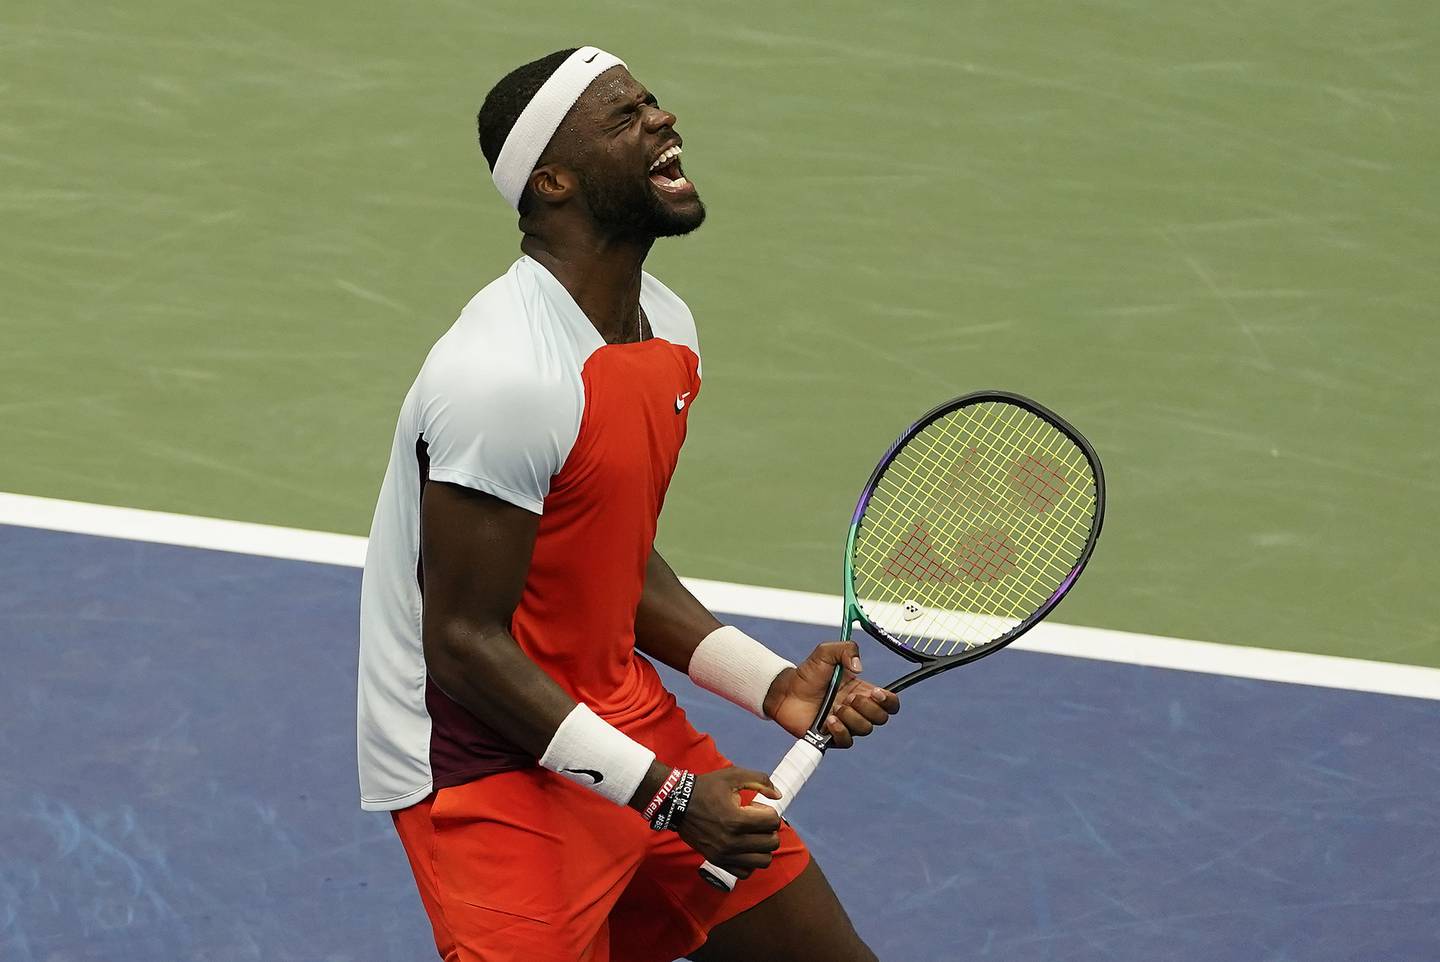 Frances Tiafoe, of the United States, reacts after defeating Andrey Rublev, of Russia, during the quarterfinals of the U.S. Open tennis championships, Wednesday, Sept. 7, 2022, in New York.